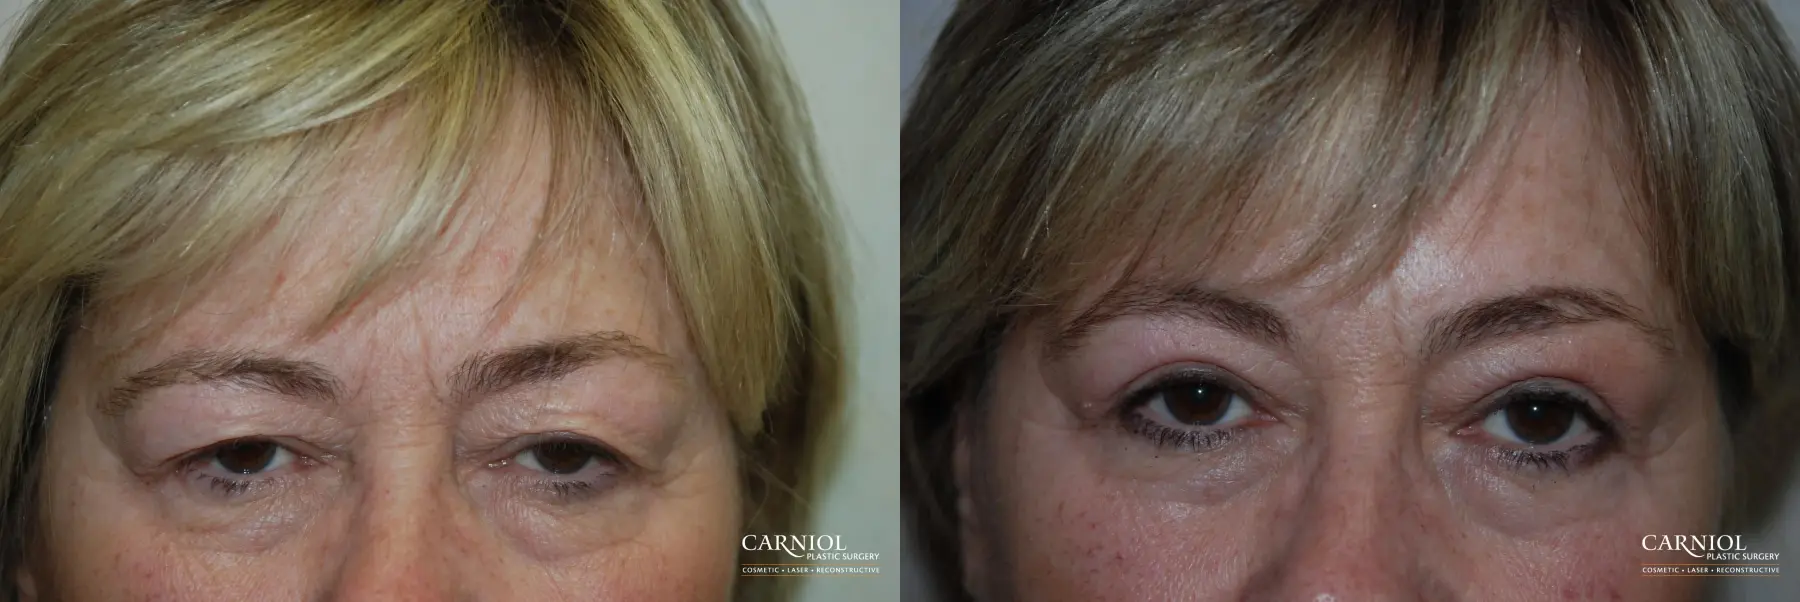 Upper Blepharoplasty Before - Before and After